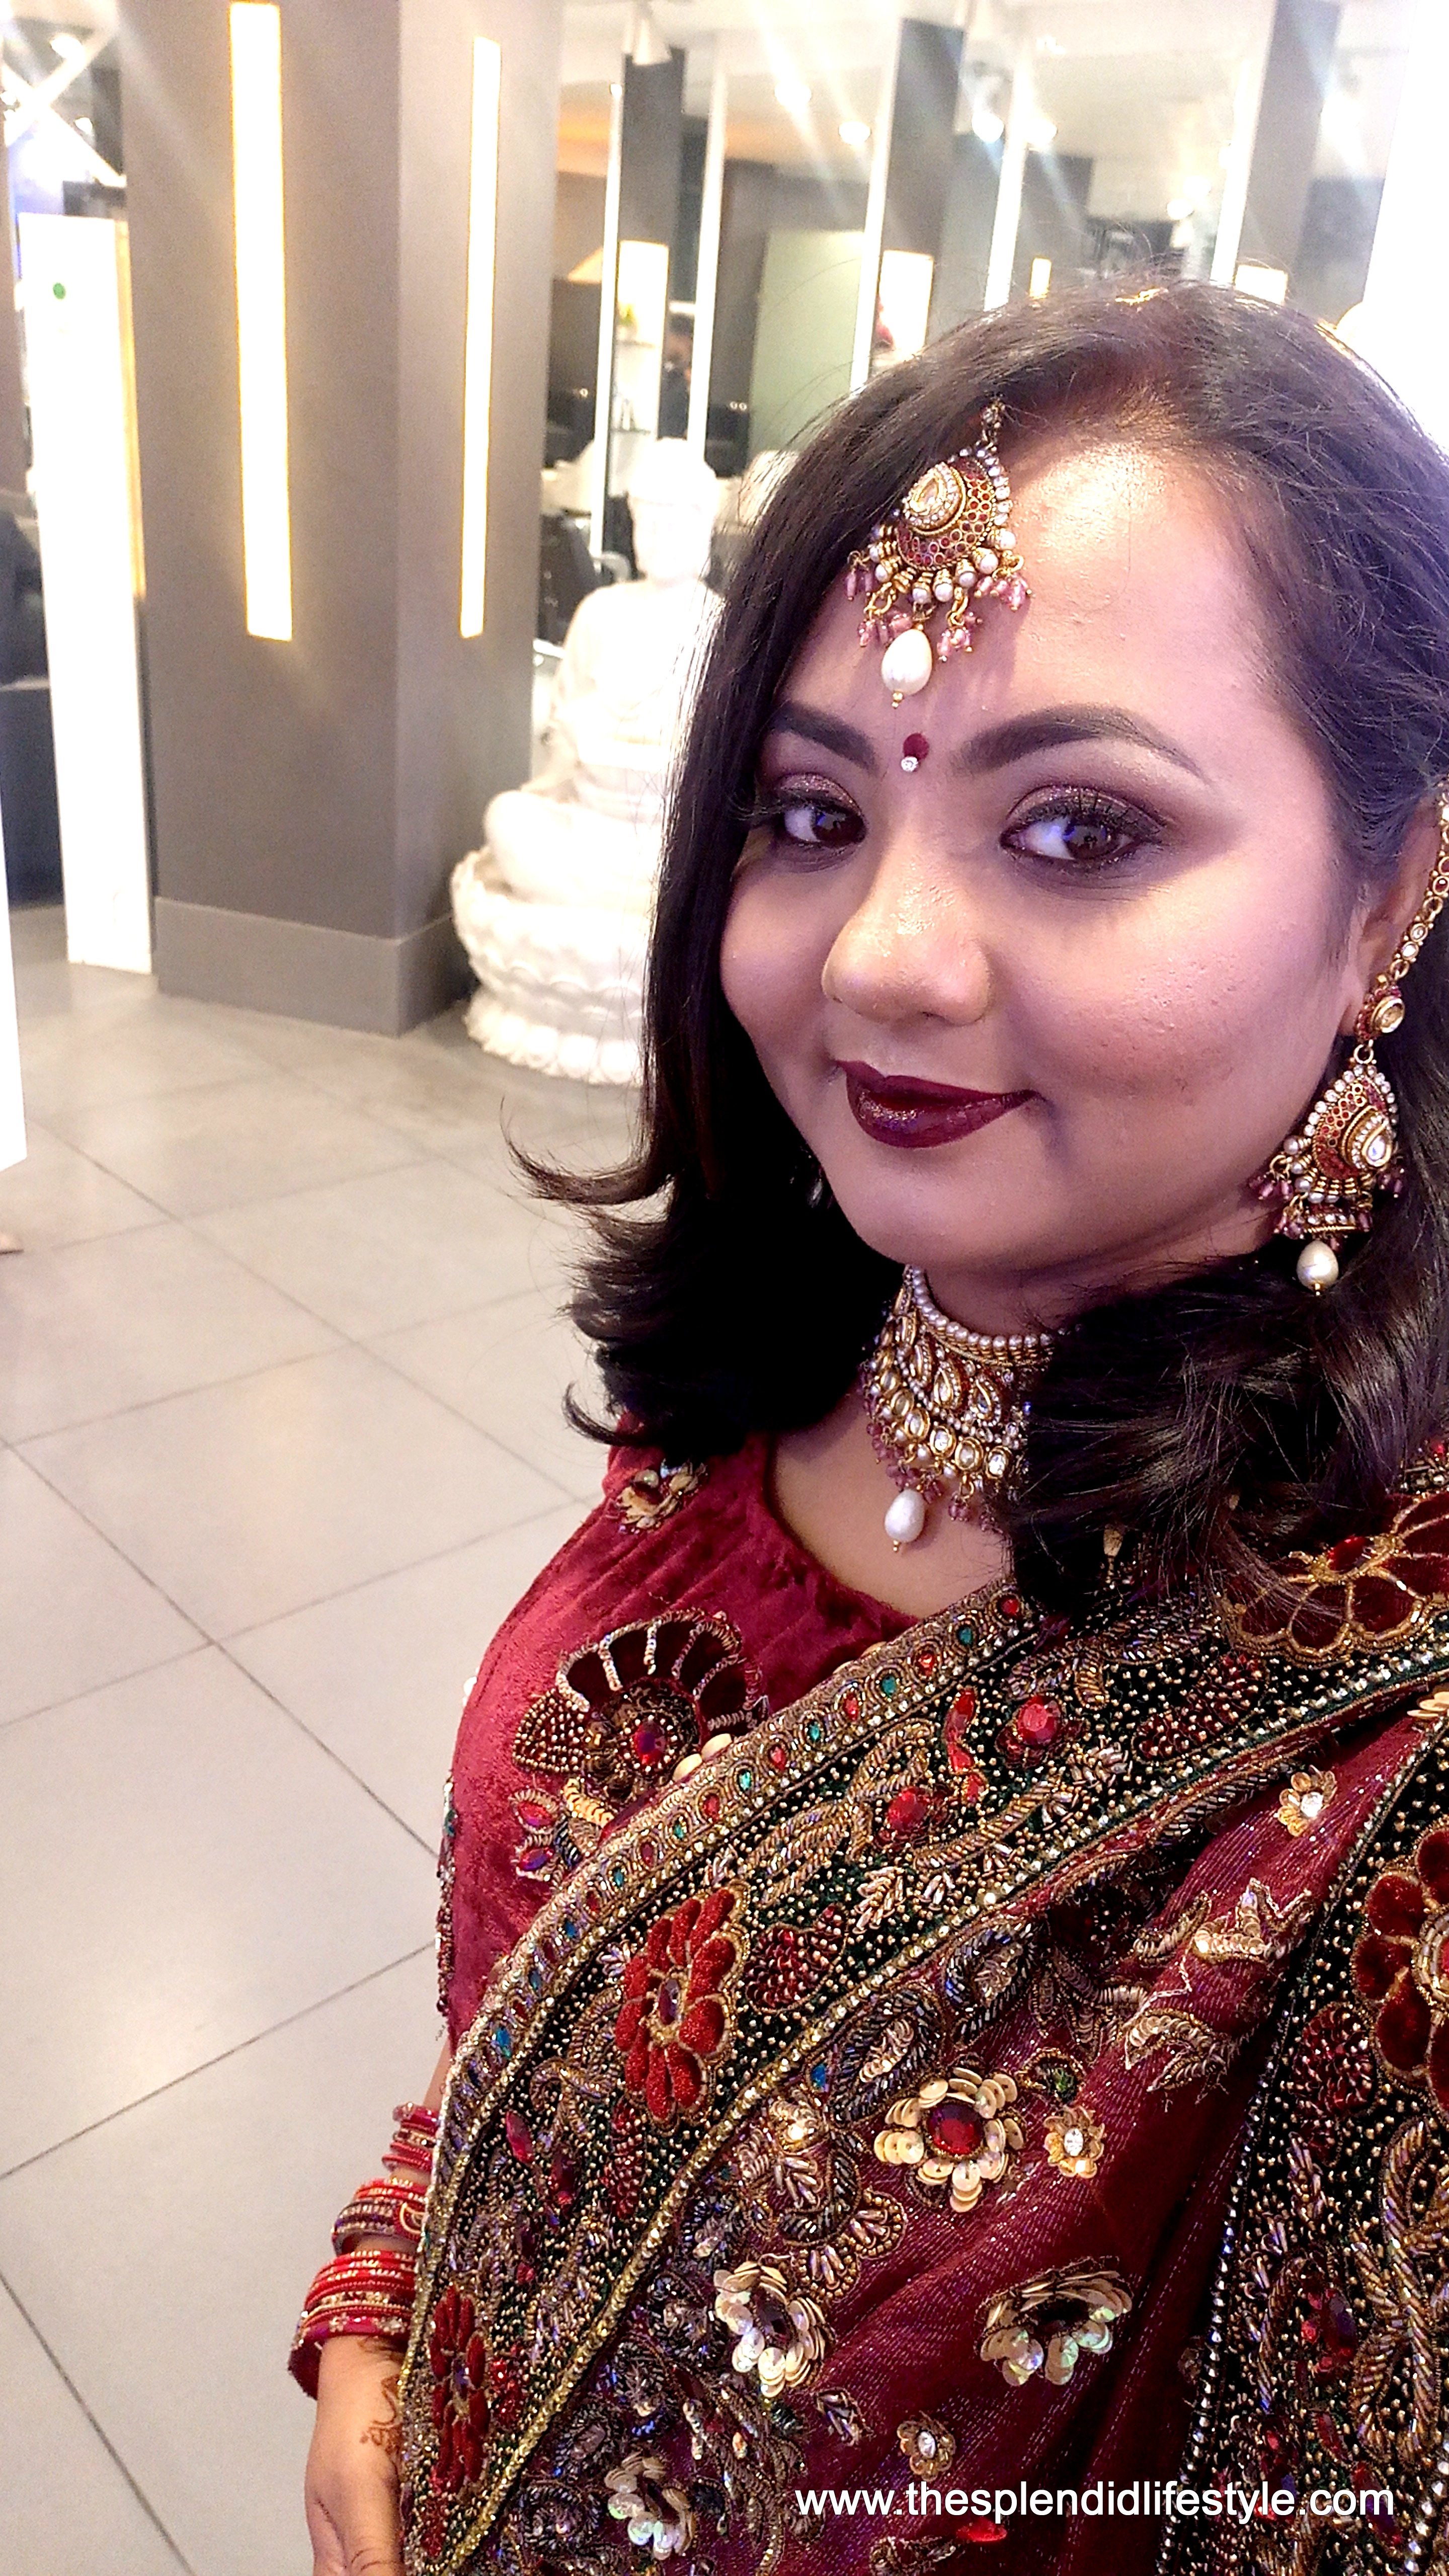 Get Ready With Me For Indian Wedding